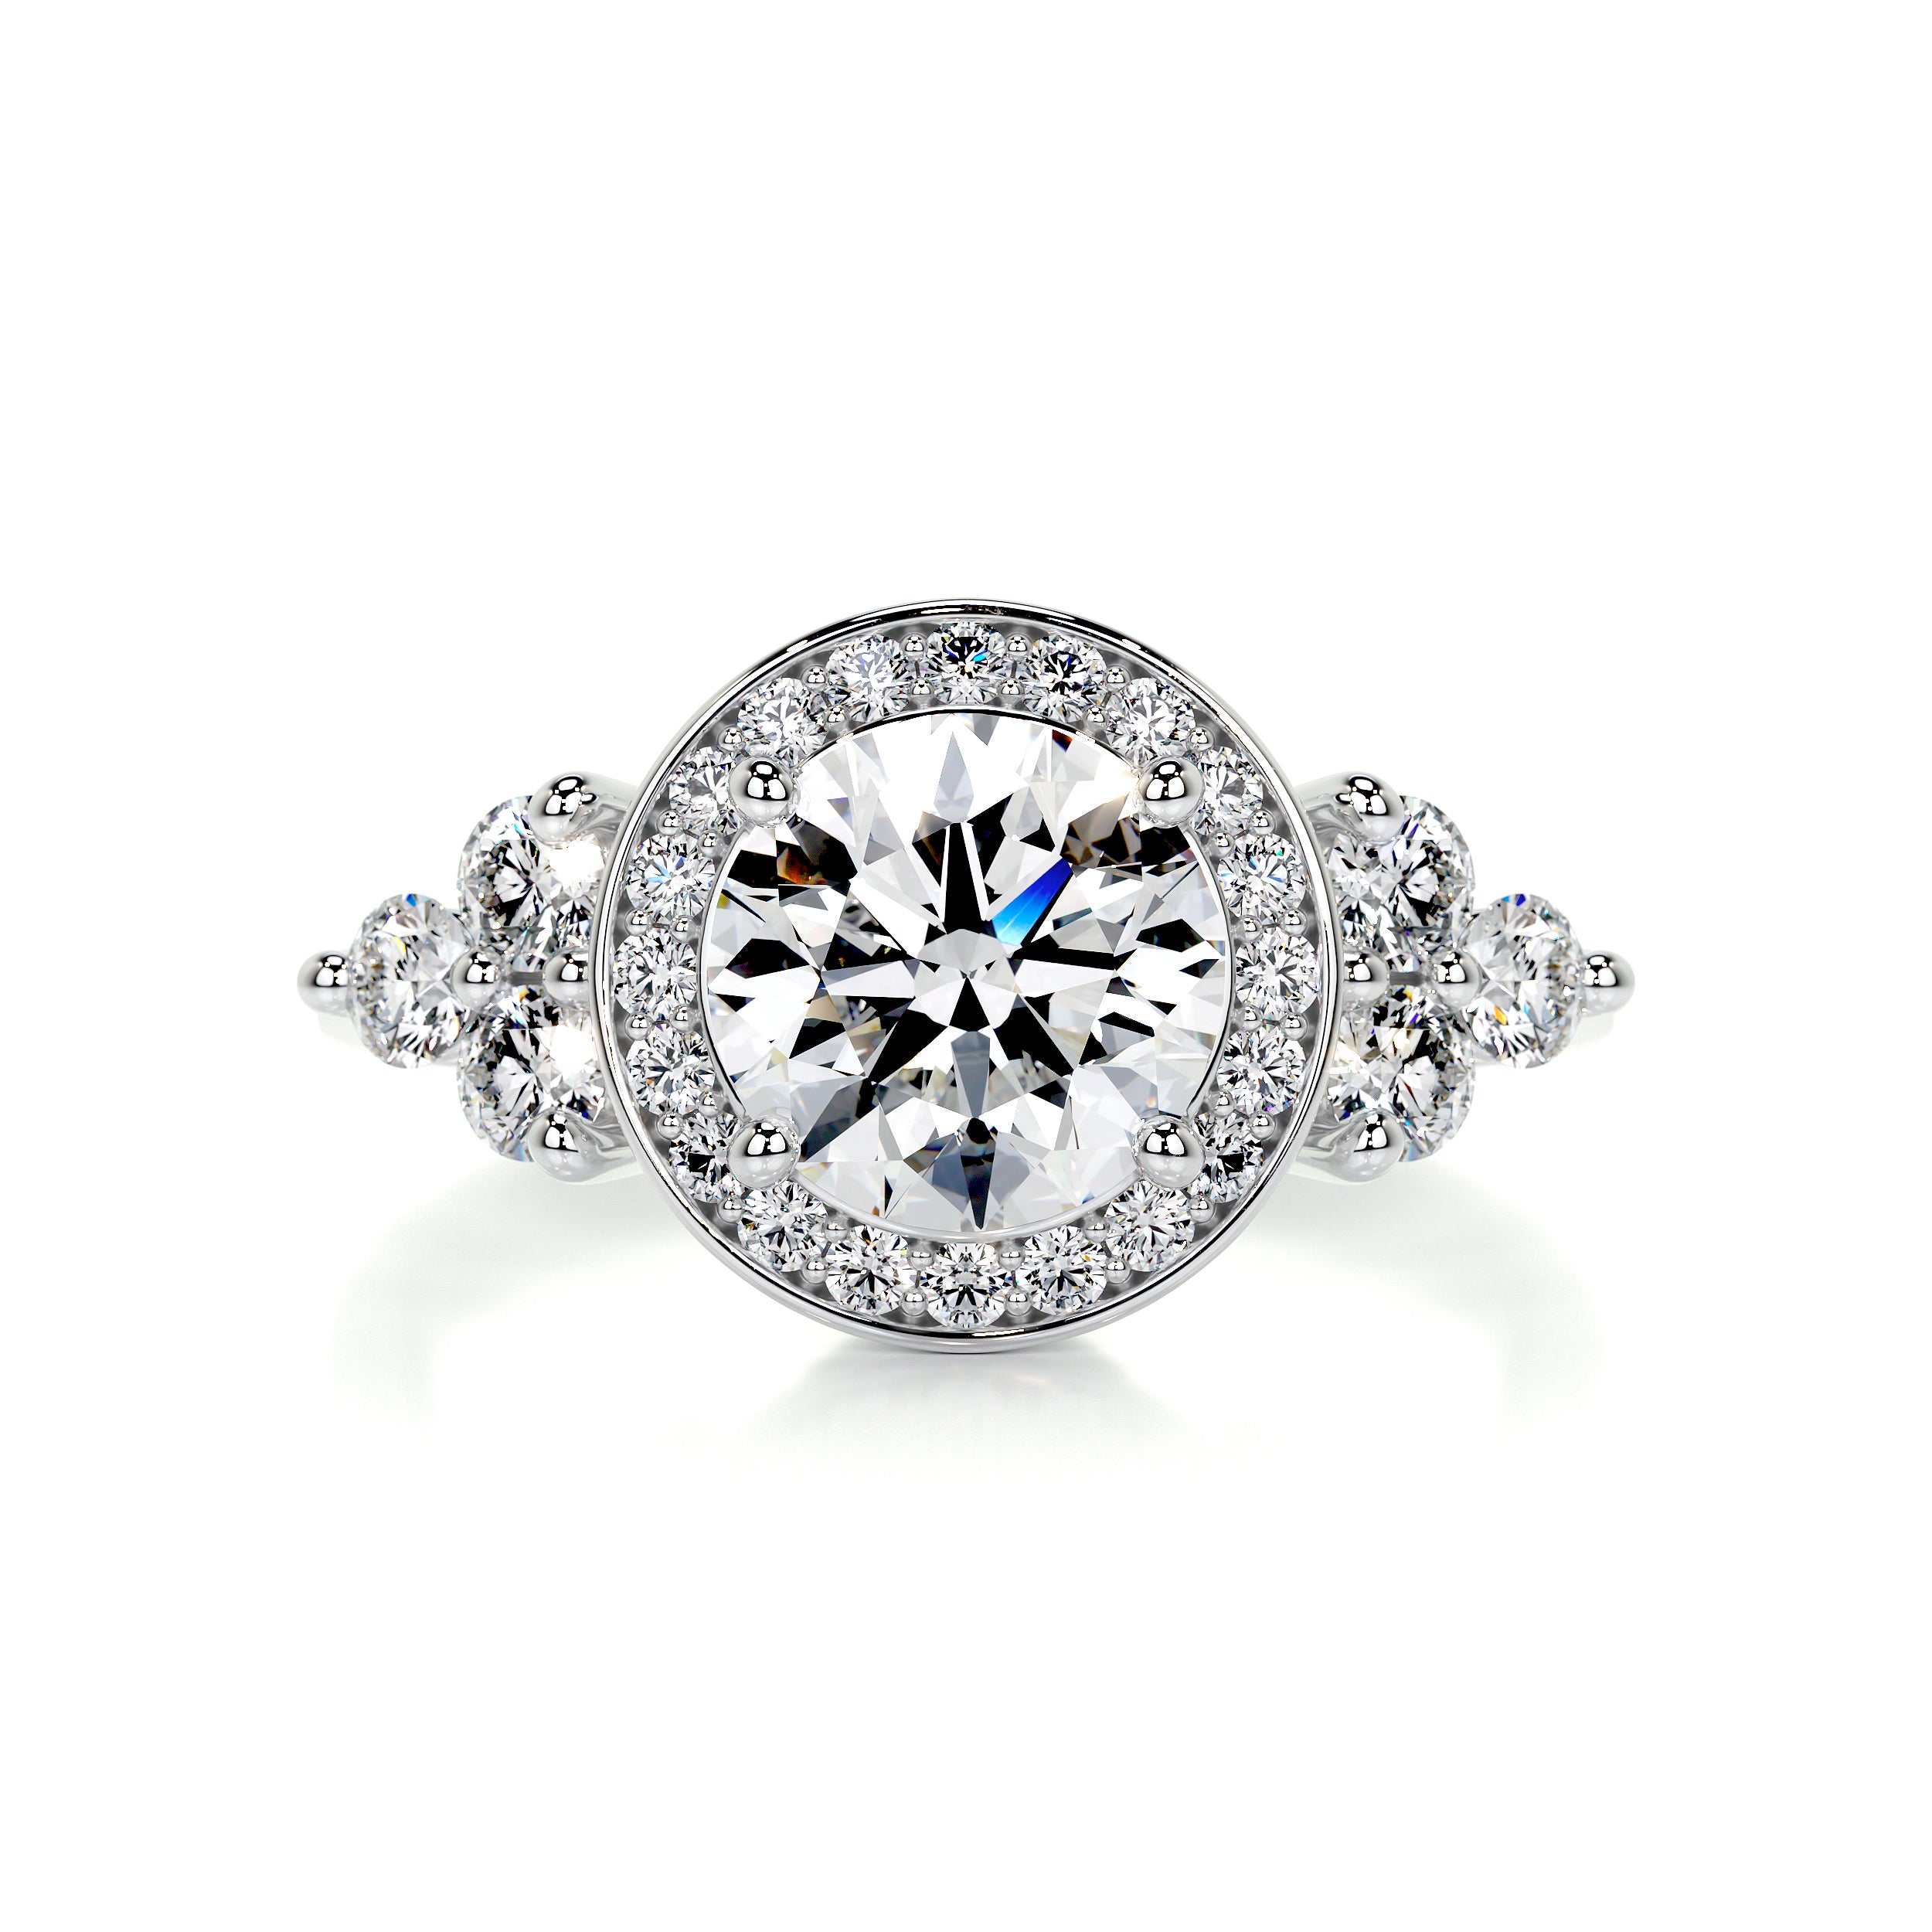 Petite Shared Prong Diamond Engagement Ring | Brilliant Earth